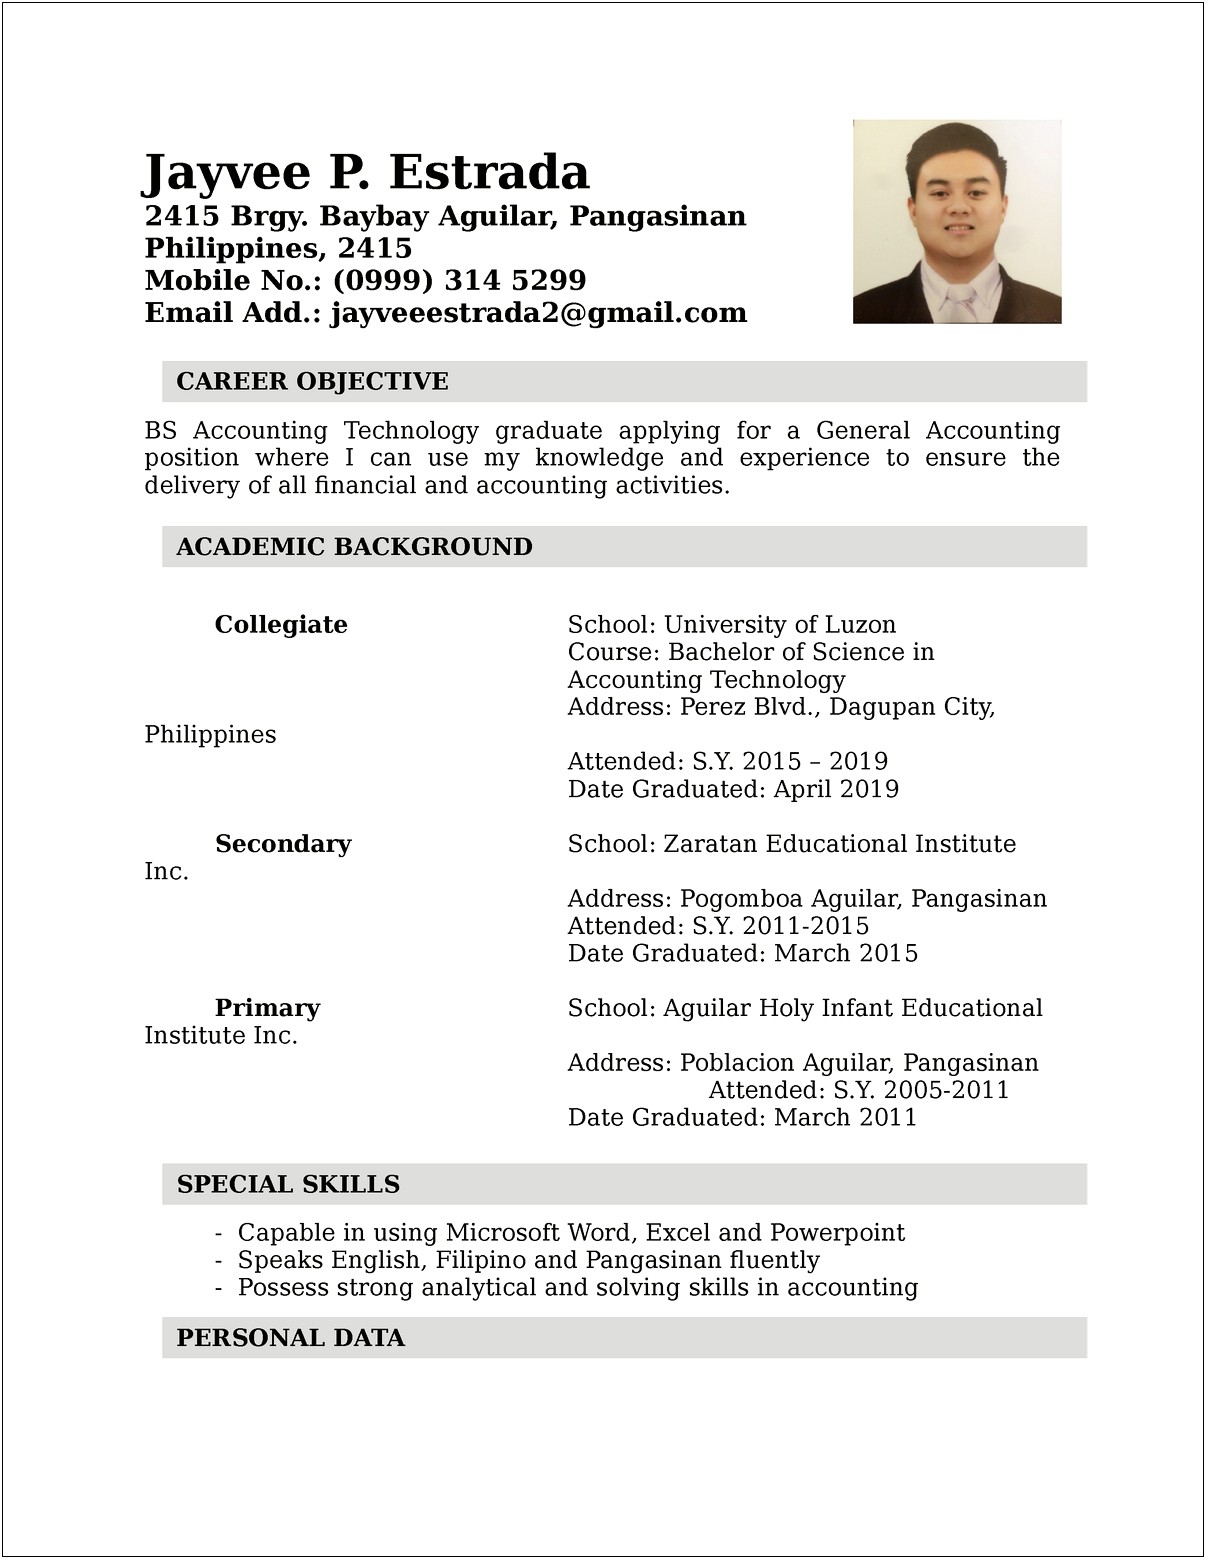 Sample Of A Good Resume Philippines